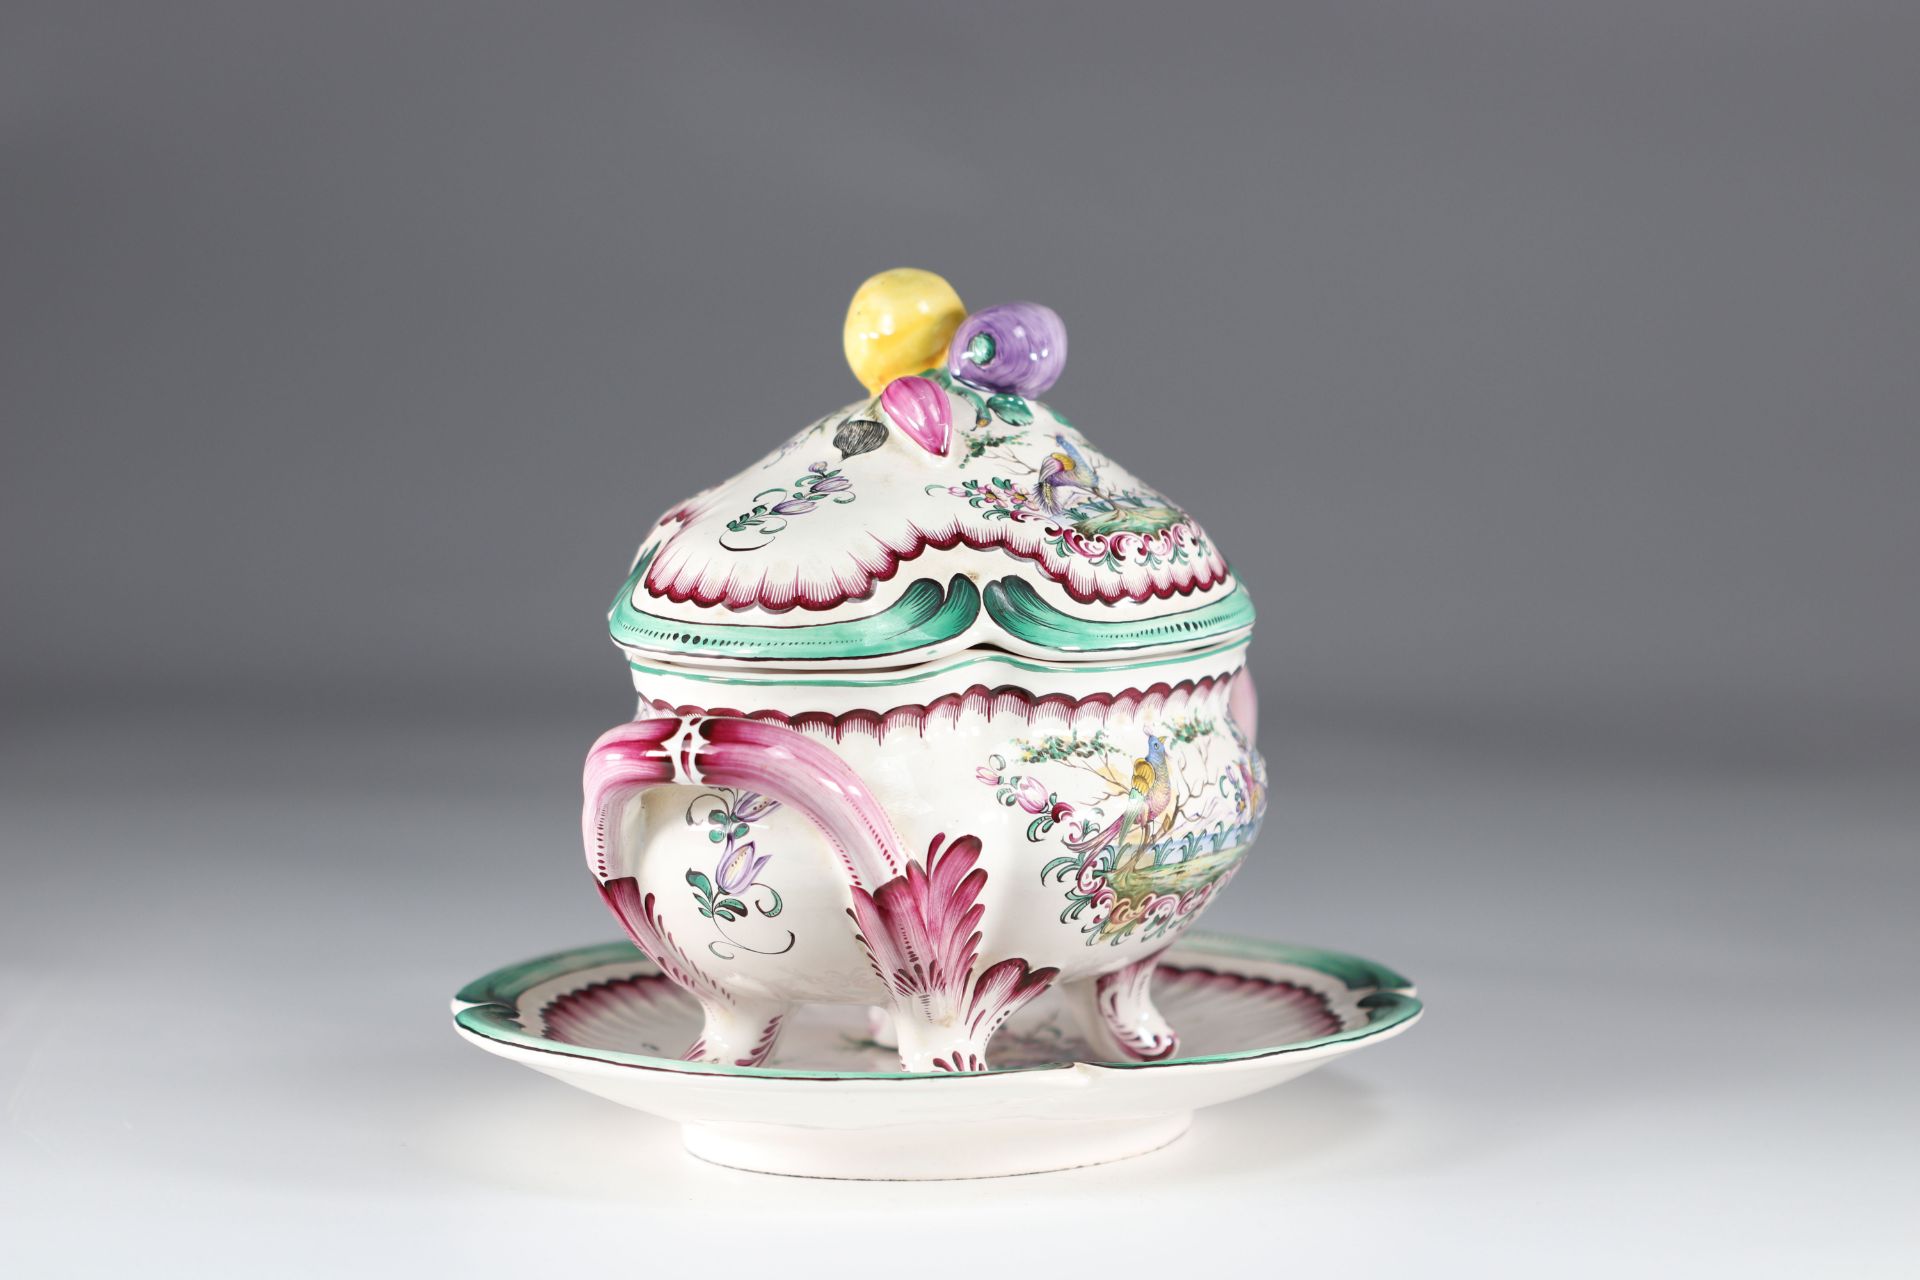 Aprey vegetable covered in earthenware with polychrome decoration, floral decoration and birds - Image 2 of 5